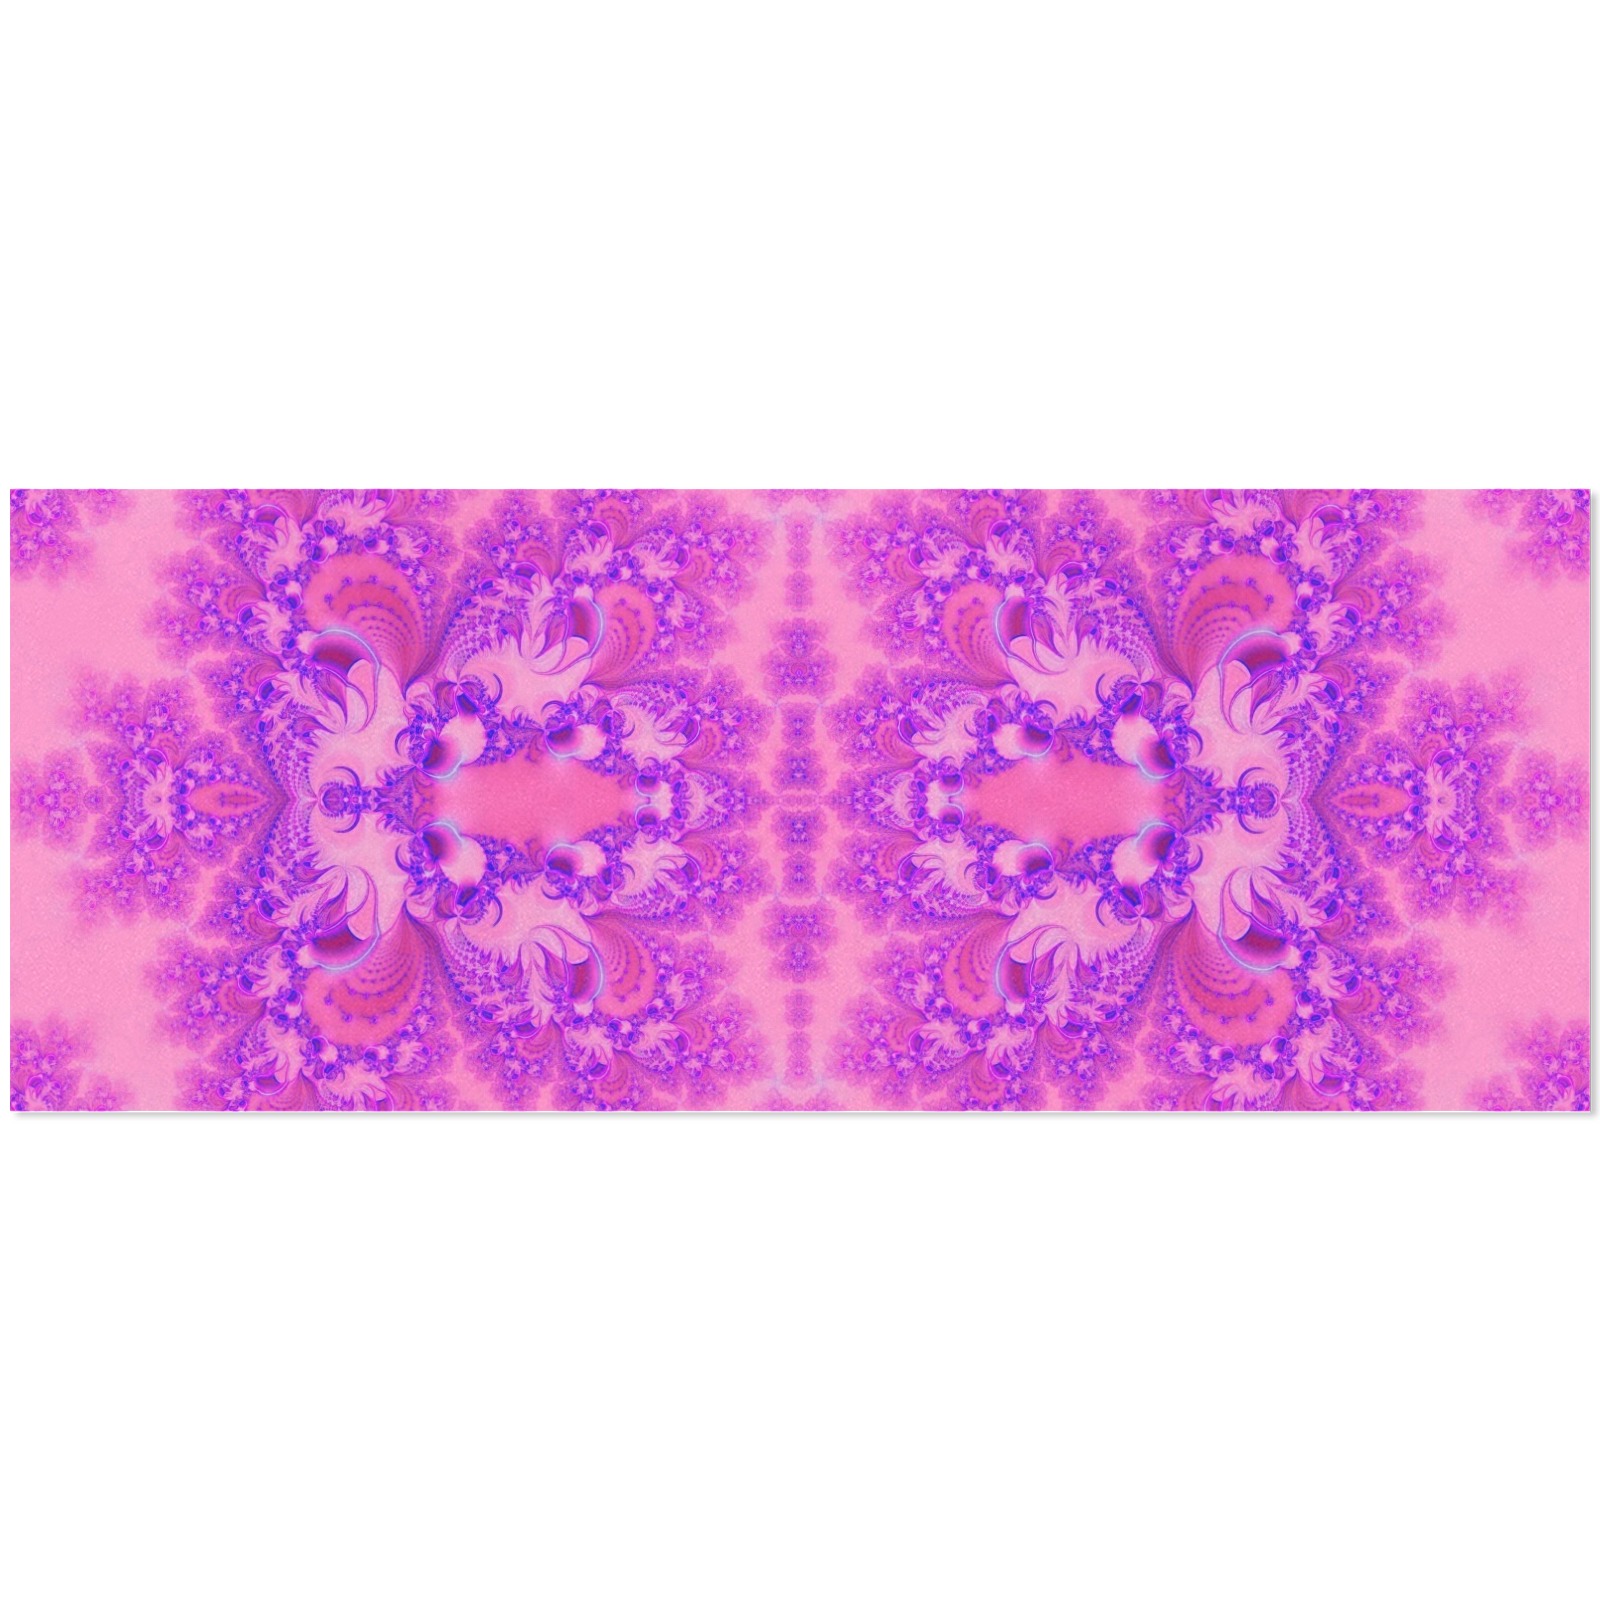 Purple and Pink Hydrangeas Frost Fractal Gift Wrapping Paper 58"x 23" (2 Rolls)